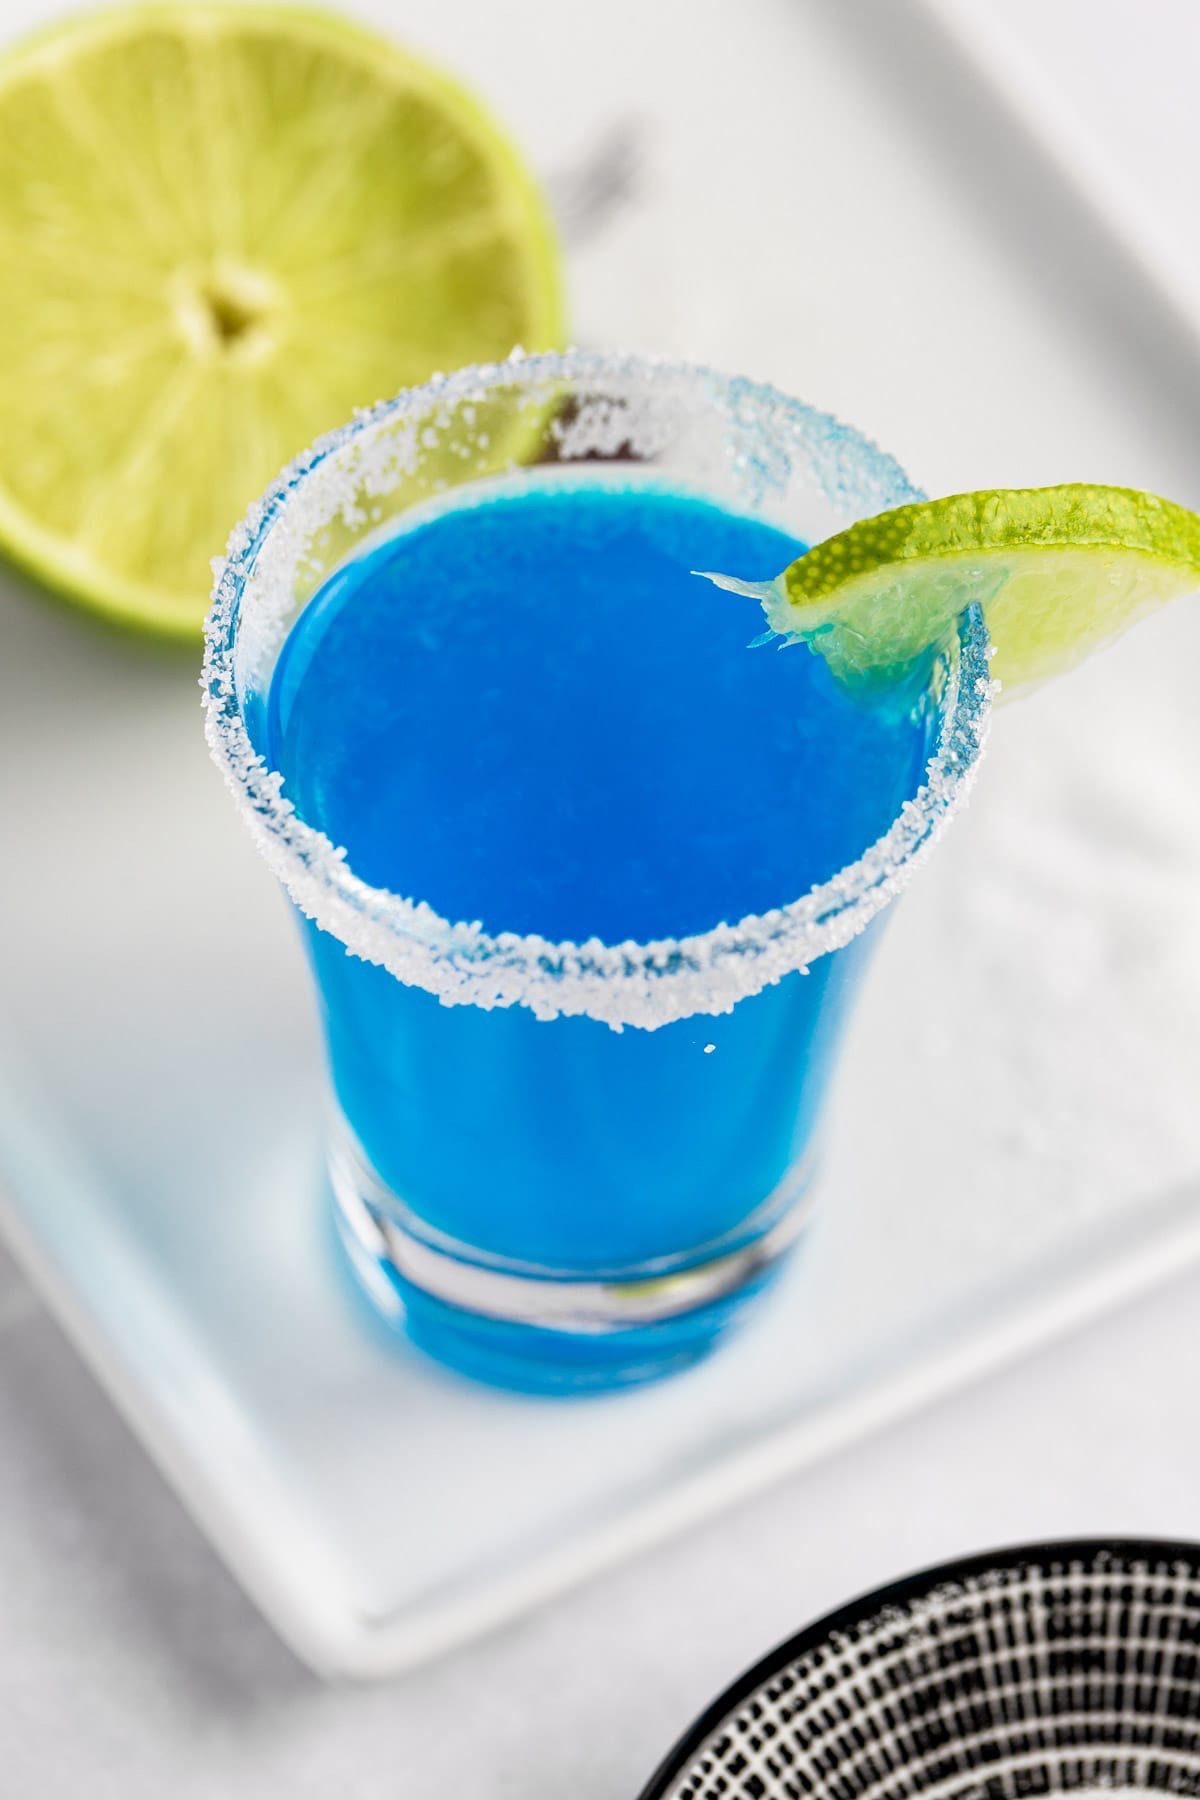 Blue Kamikaze drink with a slice of lime on the edge of the glass.